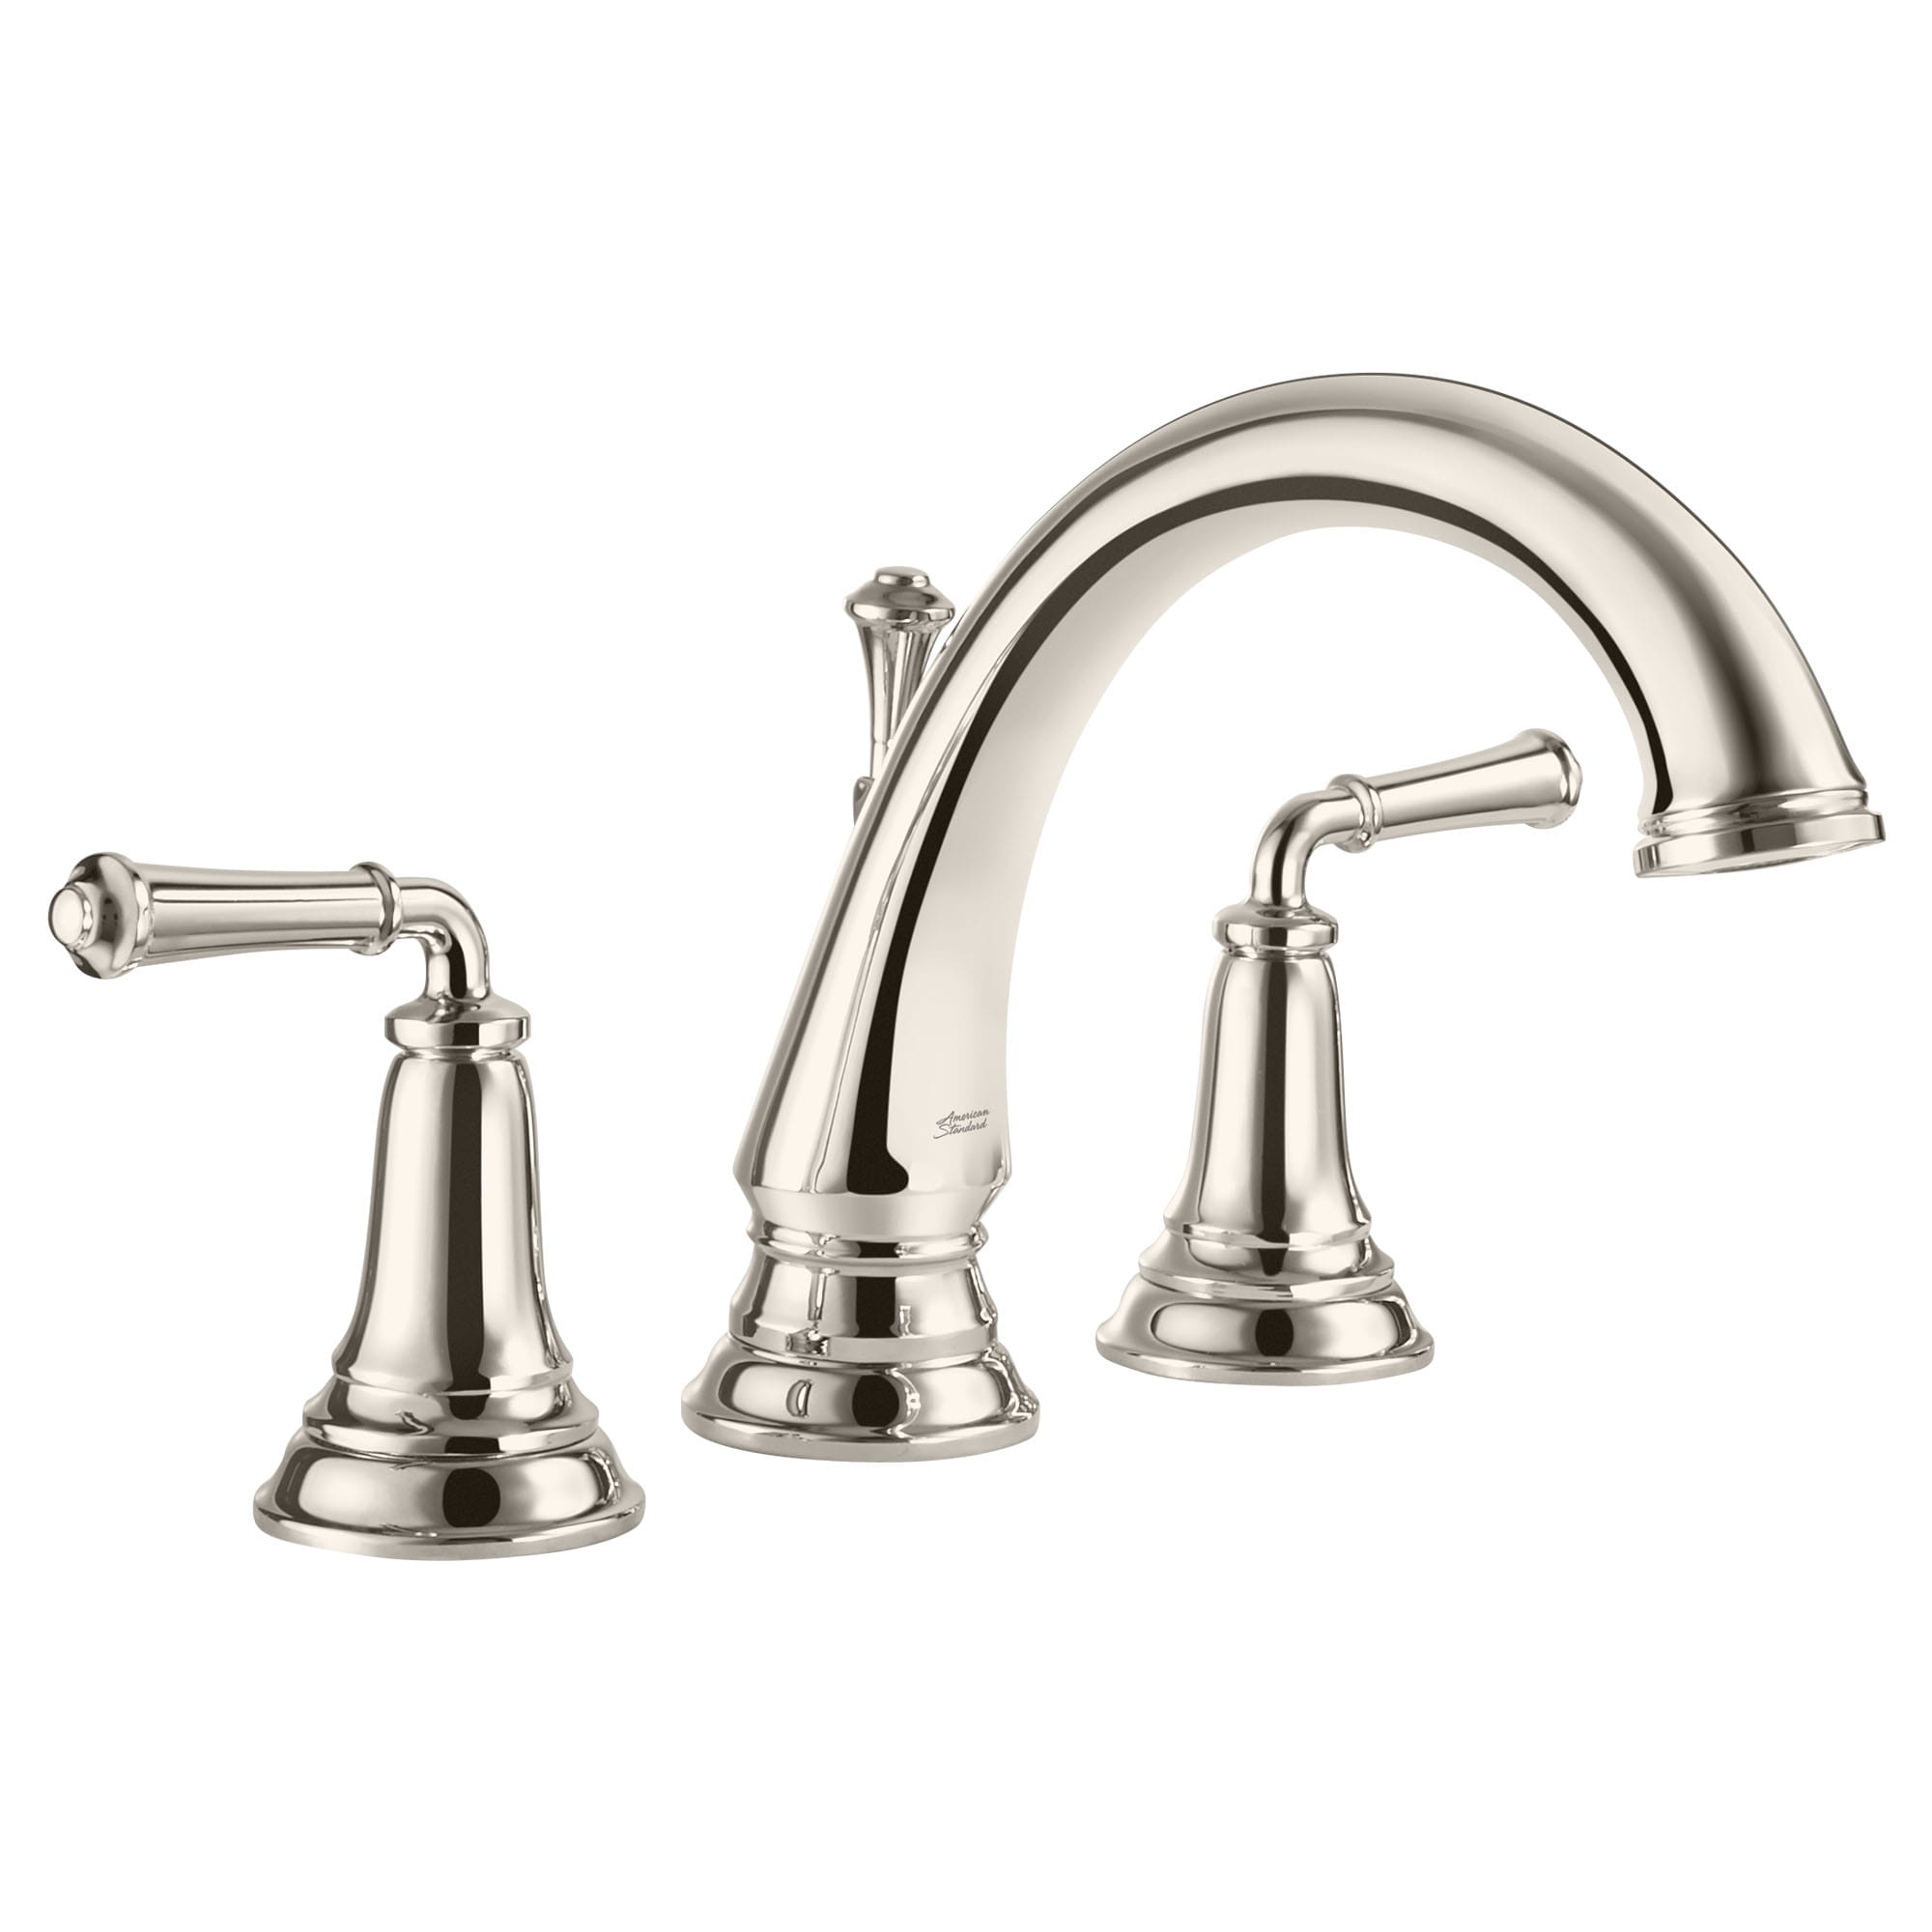 Delancey® Bathtub Faucet With Lever Handles for Flash® Rough-In Valve